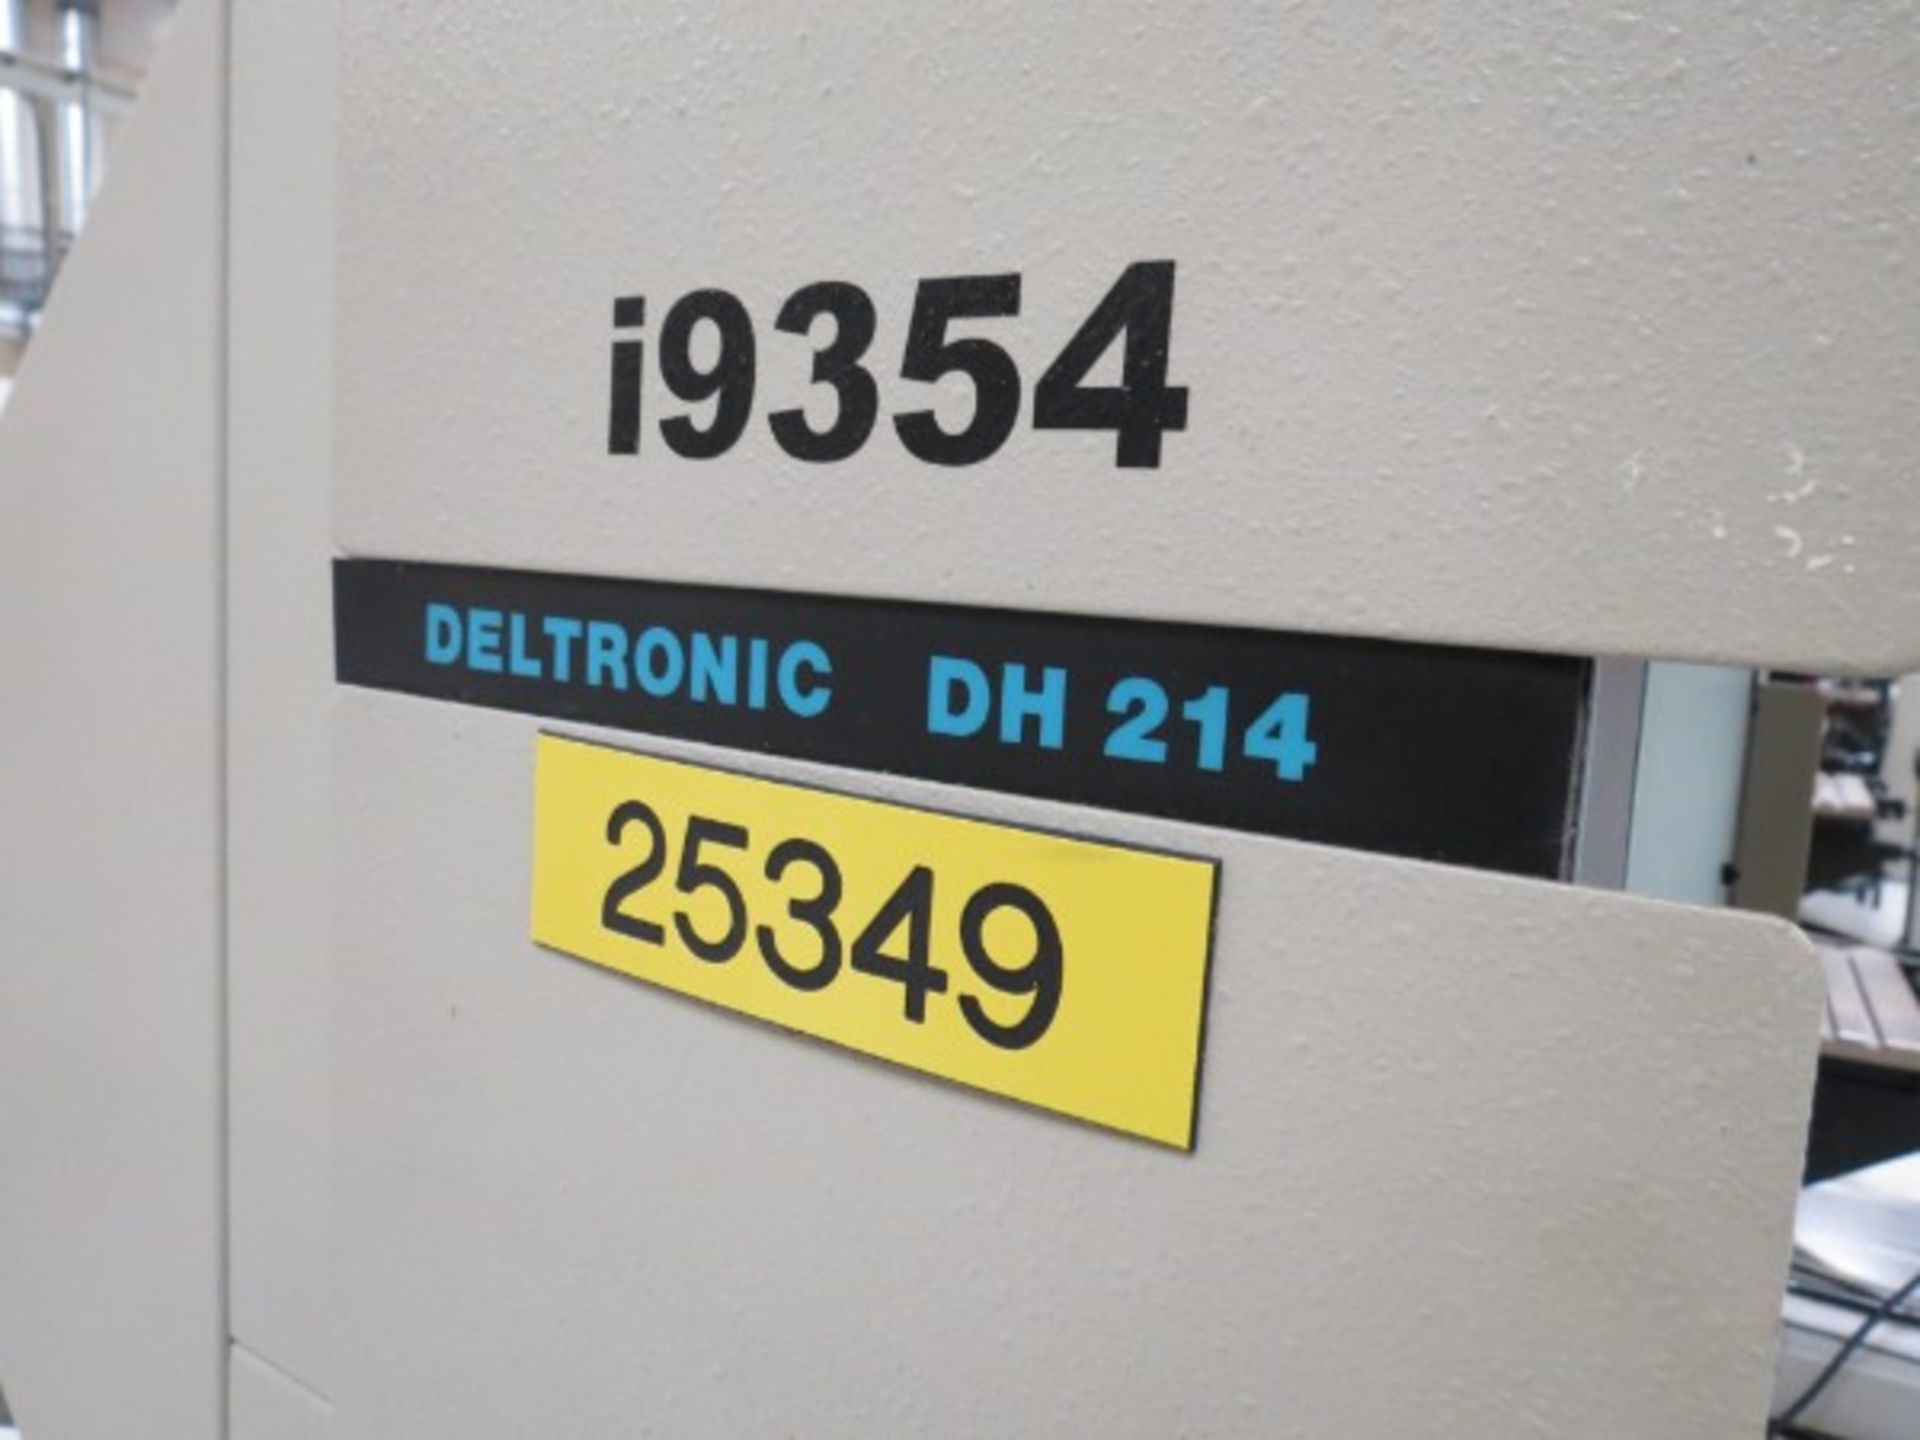 Deltronic DH214 14" Comparator, 50x magnifying lens, with DRO, S/N 2690445361 - Image 4 of 5